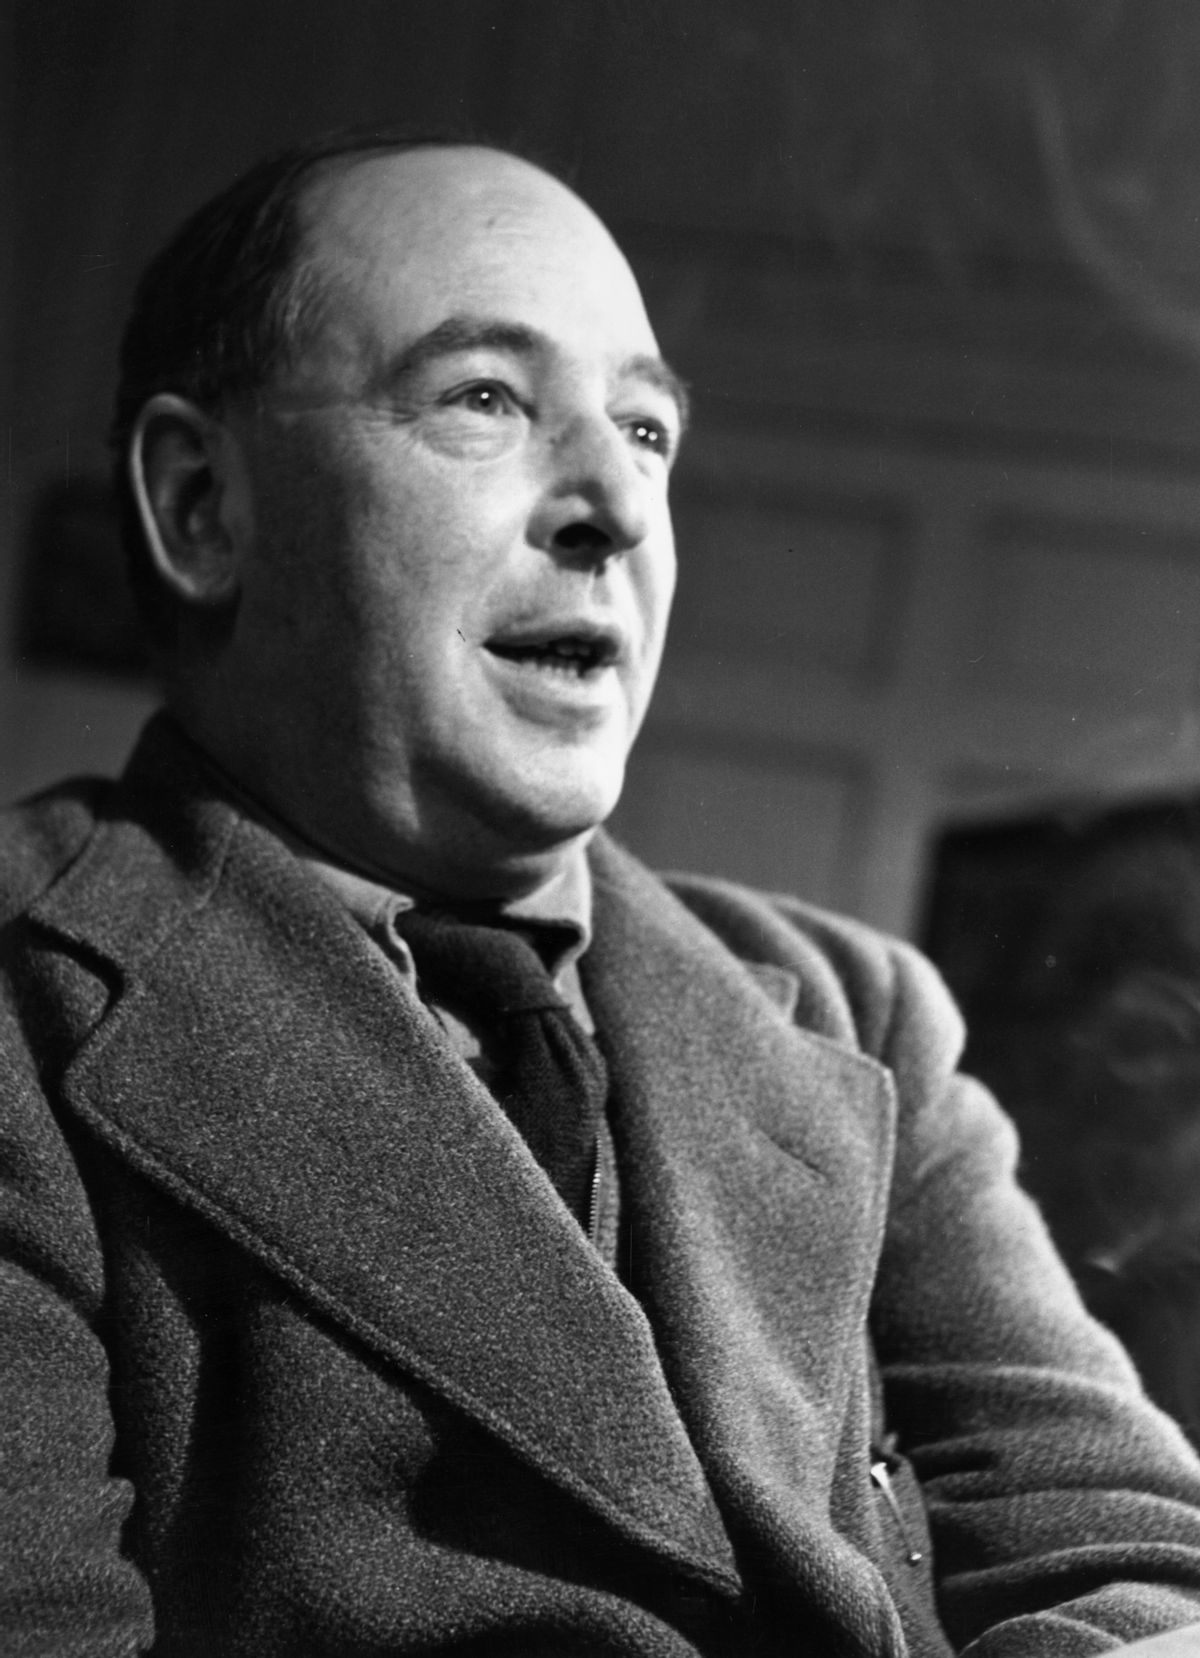 25th November 1950:  British writer C S Lewis (Clive Staples Lewis, 1898 - 1963), a Fellow and Tutor of Magdalen College, Oxford. Original Publication: Picture Post - 5159 - Eternal Oxford - pub. 1950  (Photo by John Chillingworth/Picture Post/Hulton Archive/Getty Images) (John Chillingworth/Picture Post/Hulton Archive/Getty Images)